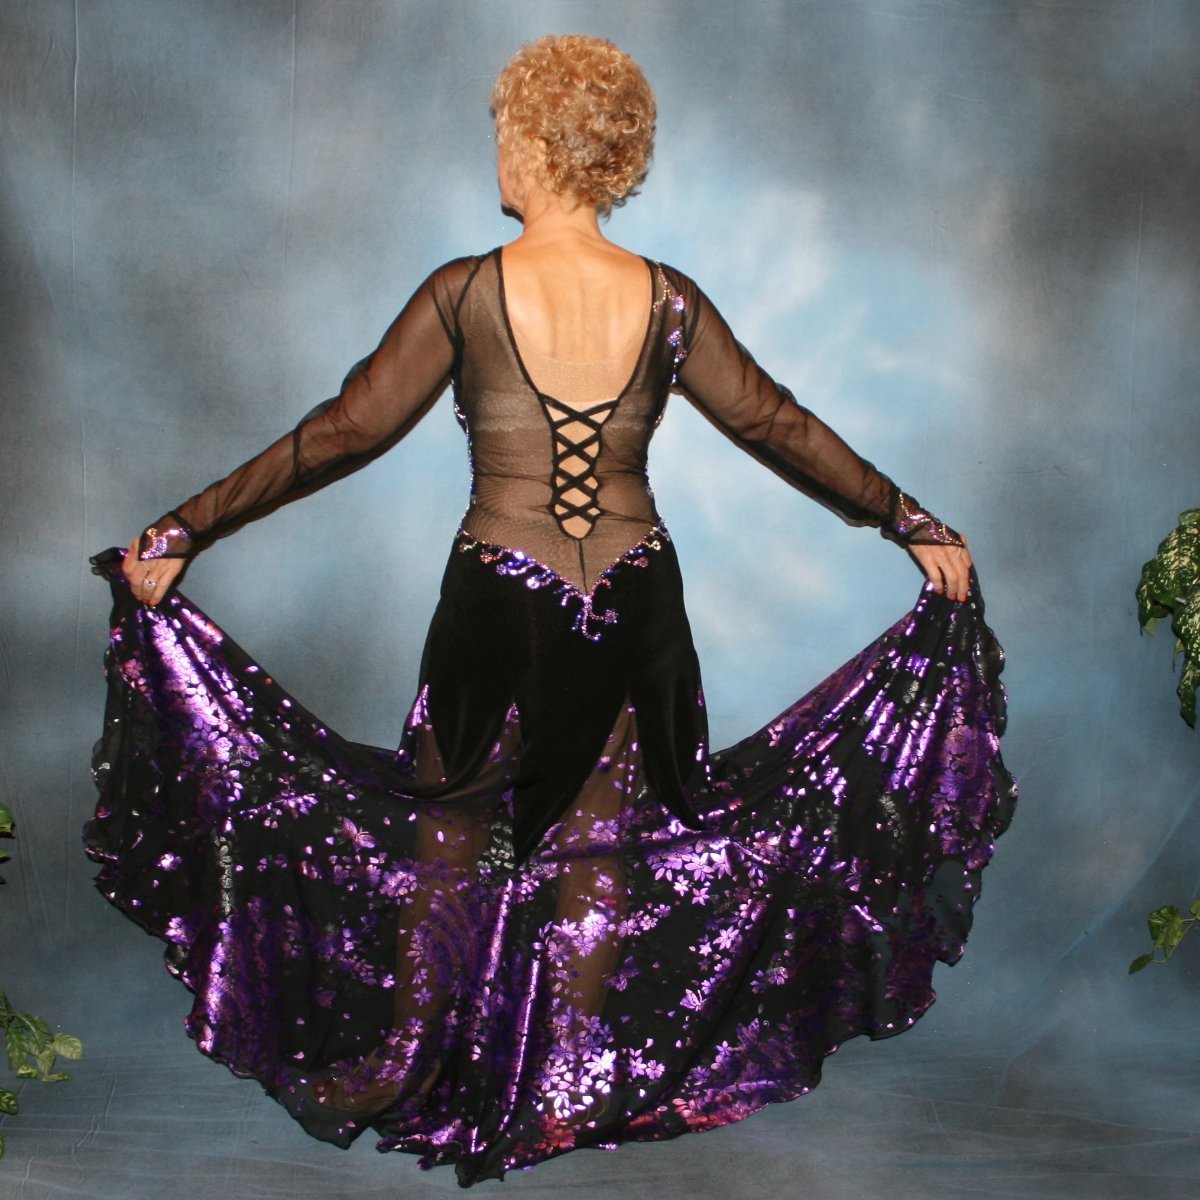 Crystal's Creations back view of Black ballroom dance dress with purple accents was created in luxurious black solid slinky on stretch mesh base figure contouring bodysuit, featuring yards of black & purple metallic print chiffon, enhanced with intricately detailed tanzinite & vitrail light Swarovski rhinestone work.